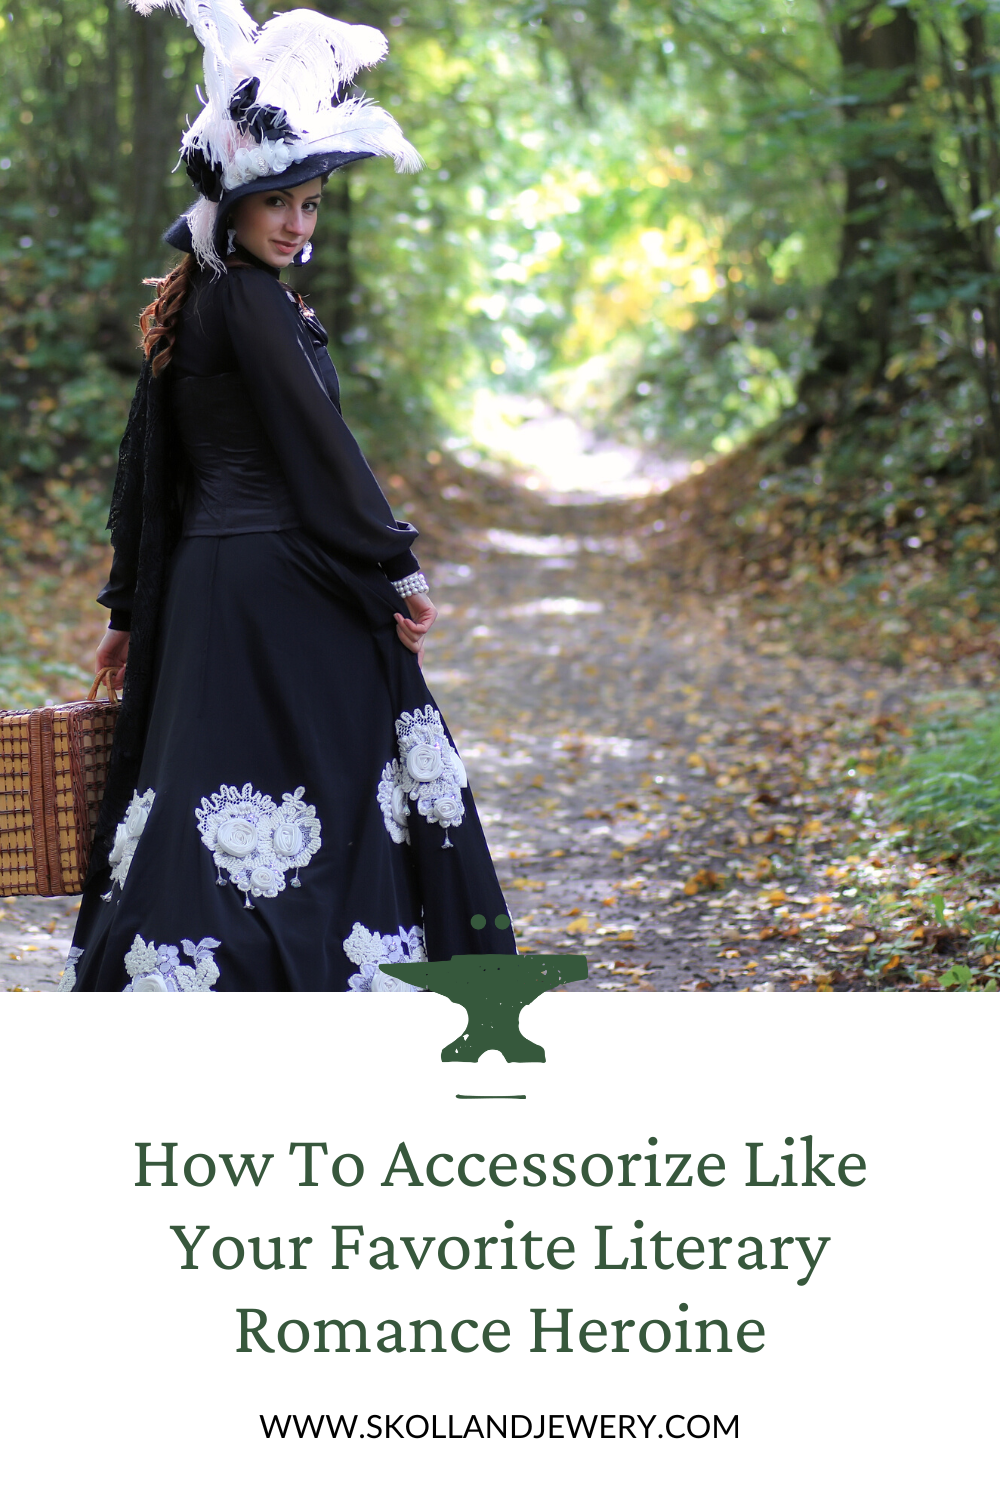 a woman dressed in attire from the late 1800's is walking down a forest path. Below this image is text that reads" How to Accesorize Like your Favorite Literary Romance Heroine".